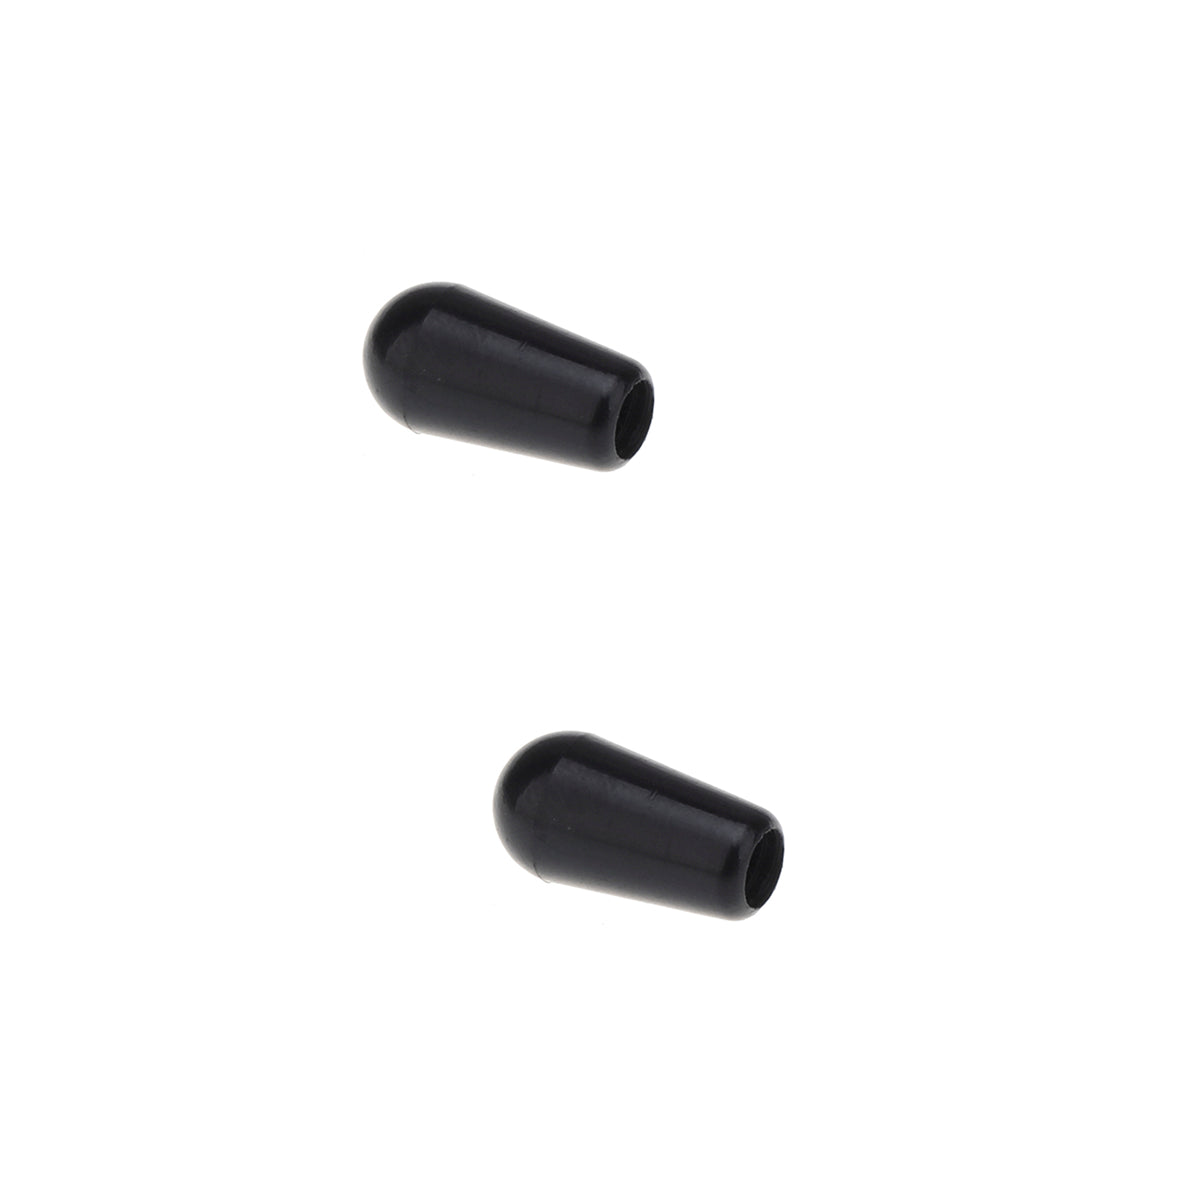 Musiclily Pro Inch Size Thread Plastic Guitar Toggle Pickup Switch Tips for LP Style, Black(2 Pieces)